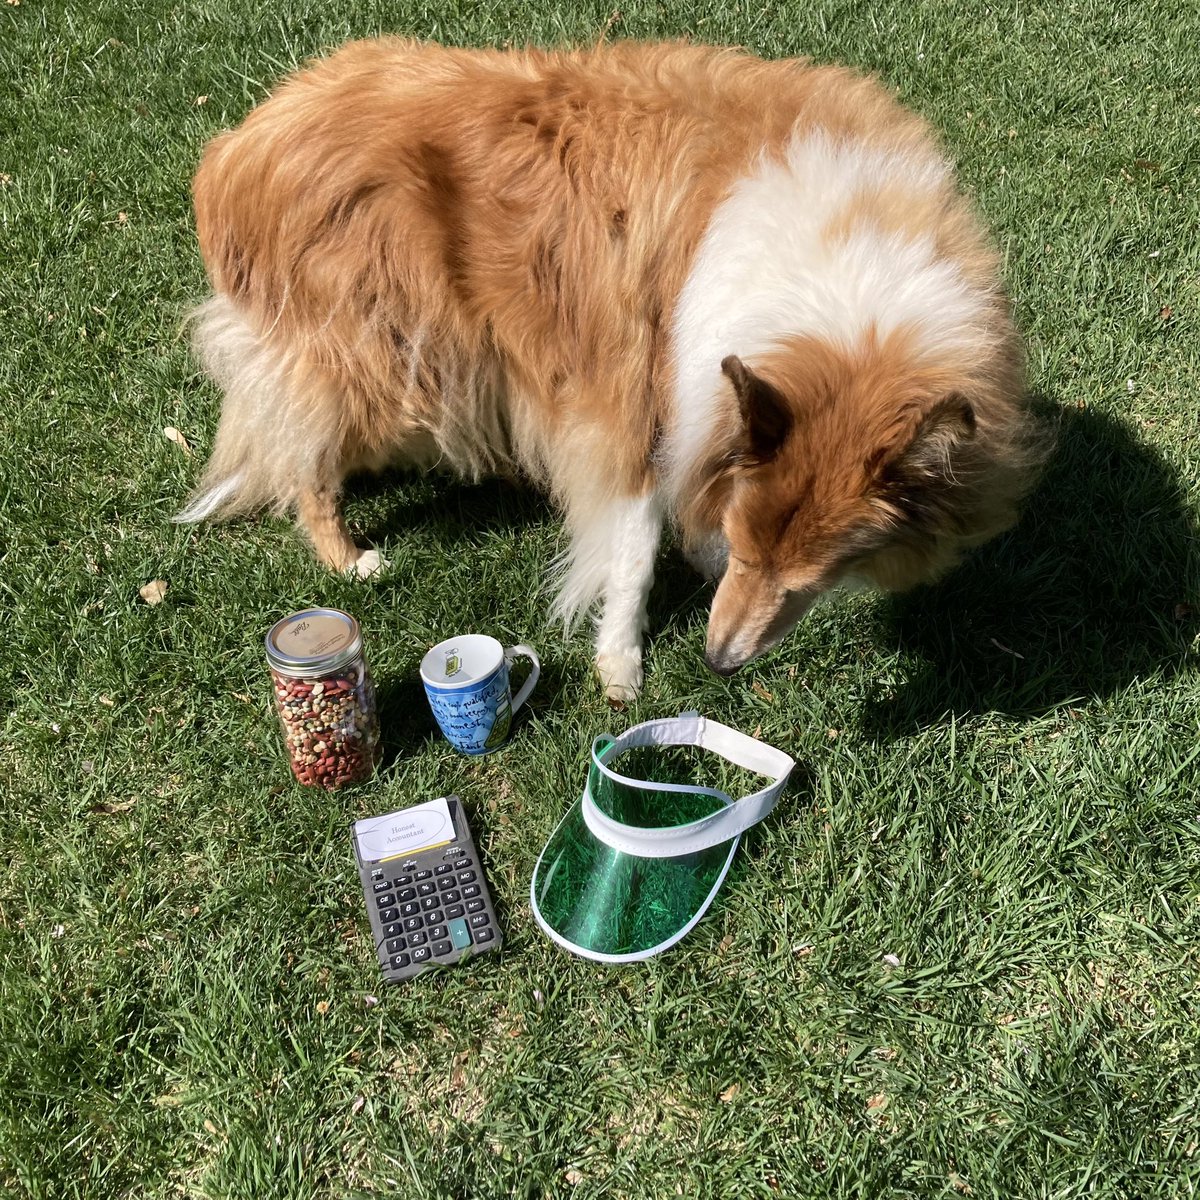 🧮 It’s Tax Day in the USA!  I’m counting beans 🫘 and filling out tax forms!  📝 

instagram.com/reel/CrMOzLBJN… 

#taxday #fileyourtaxes #CPA #taxaccountant #beancounter 🫘🧮 #roughday #roughcollie #collie